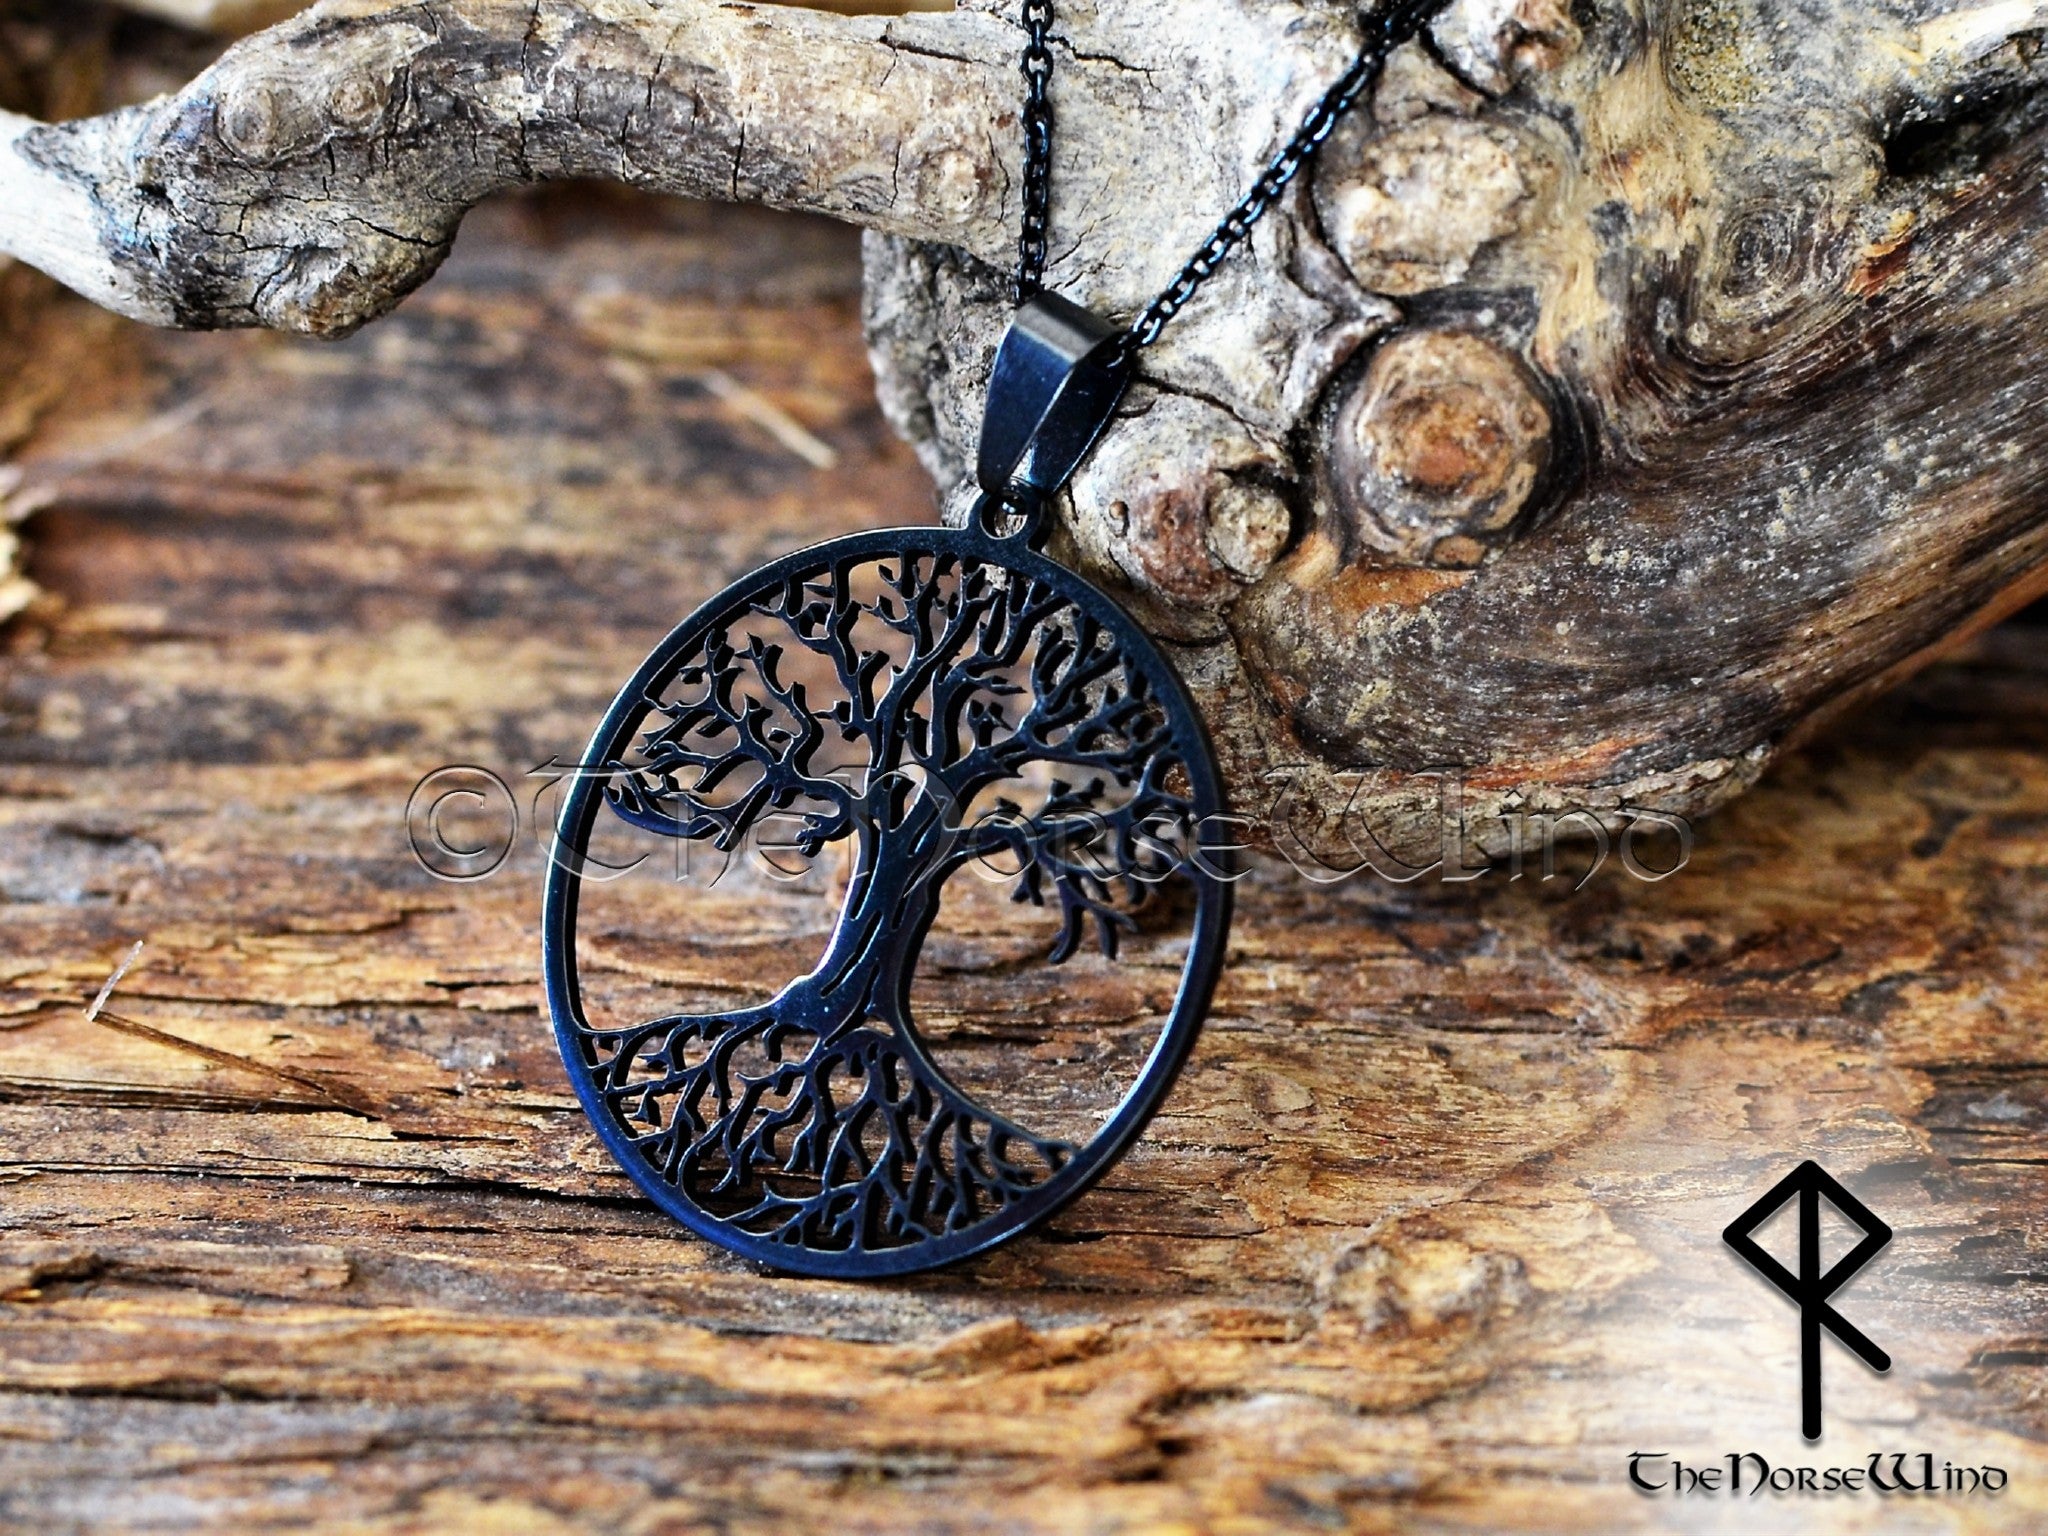 Tree of Life Amulet in Sterling Silver with Diamonds, 21mm | David Yurman